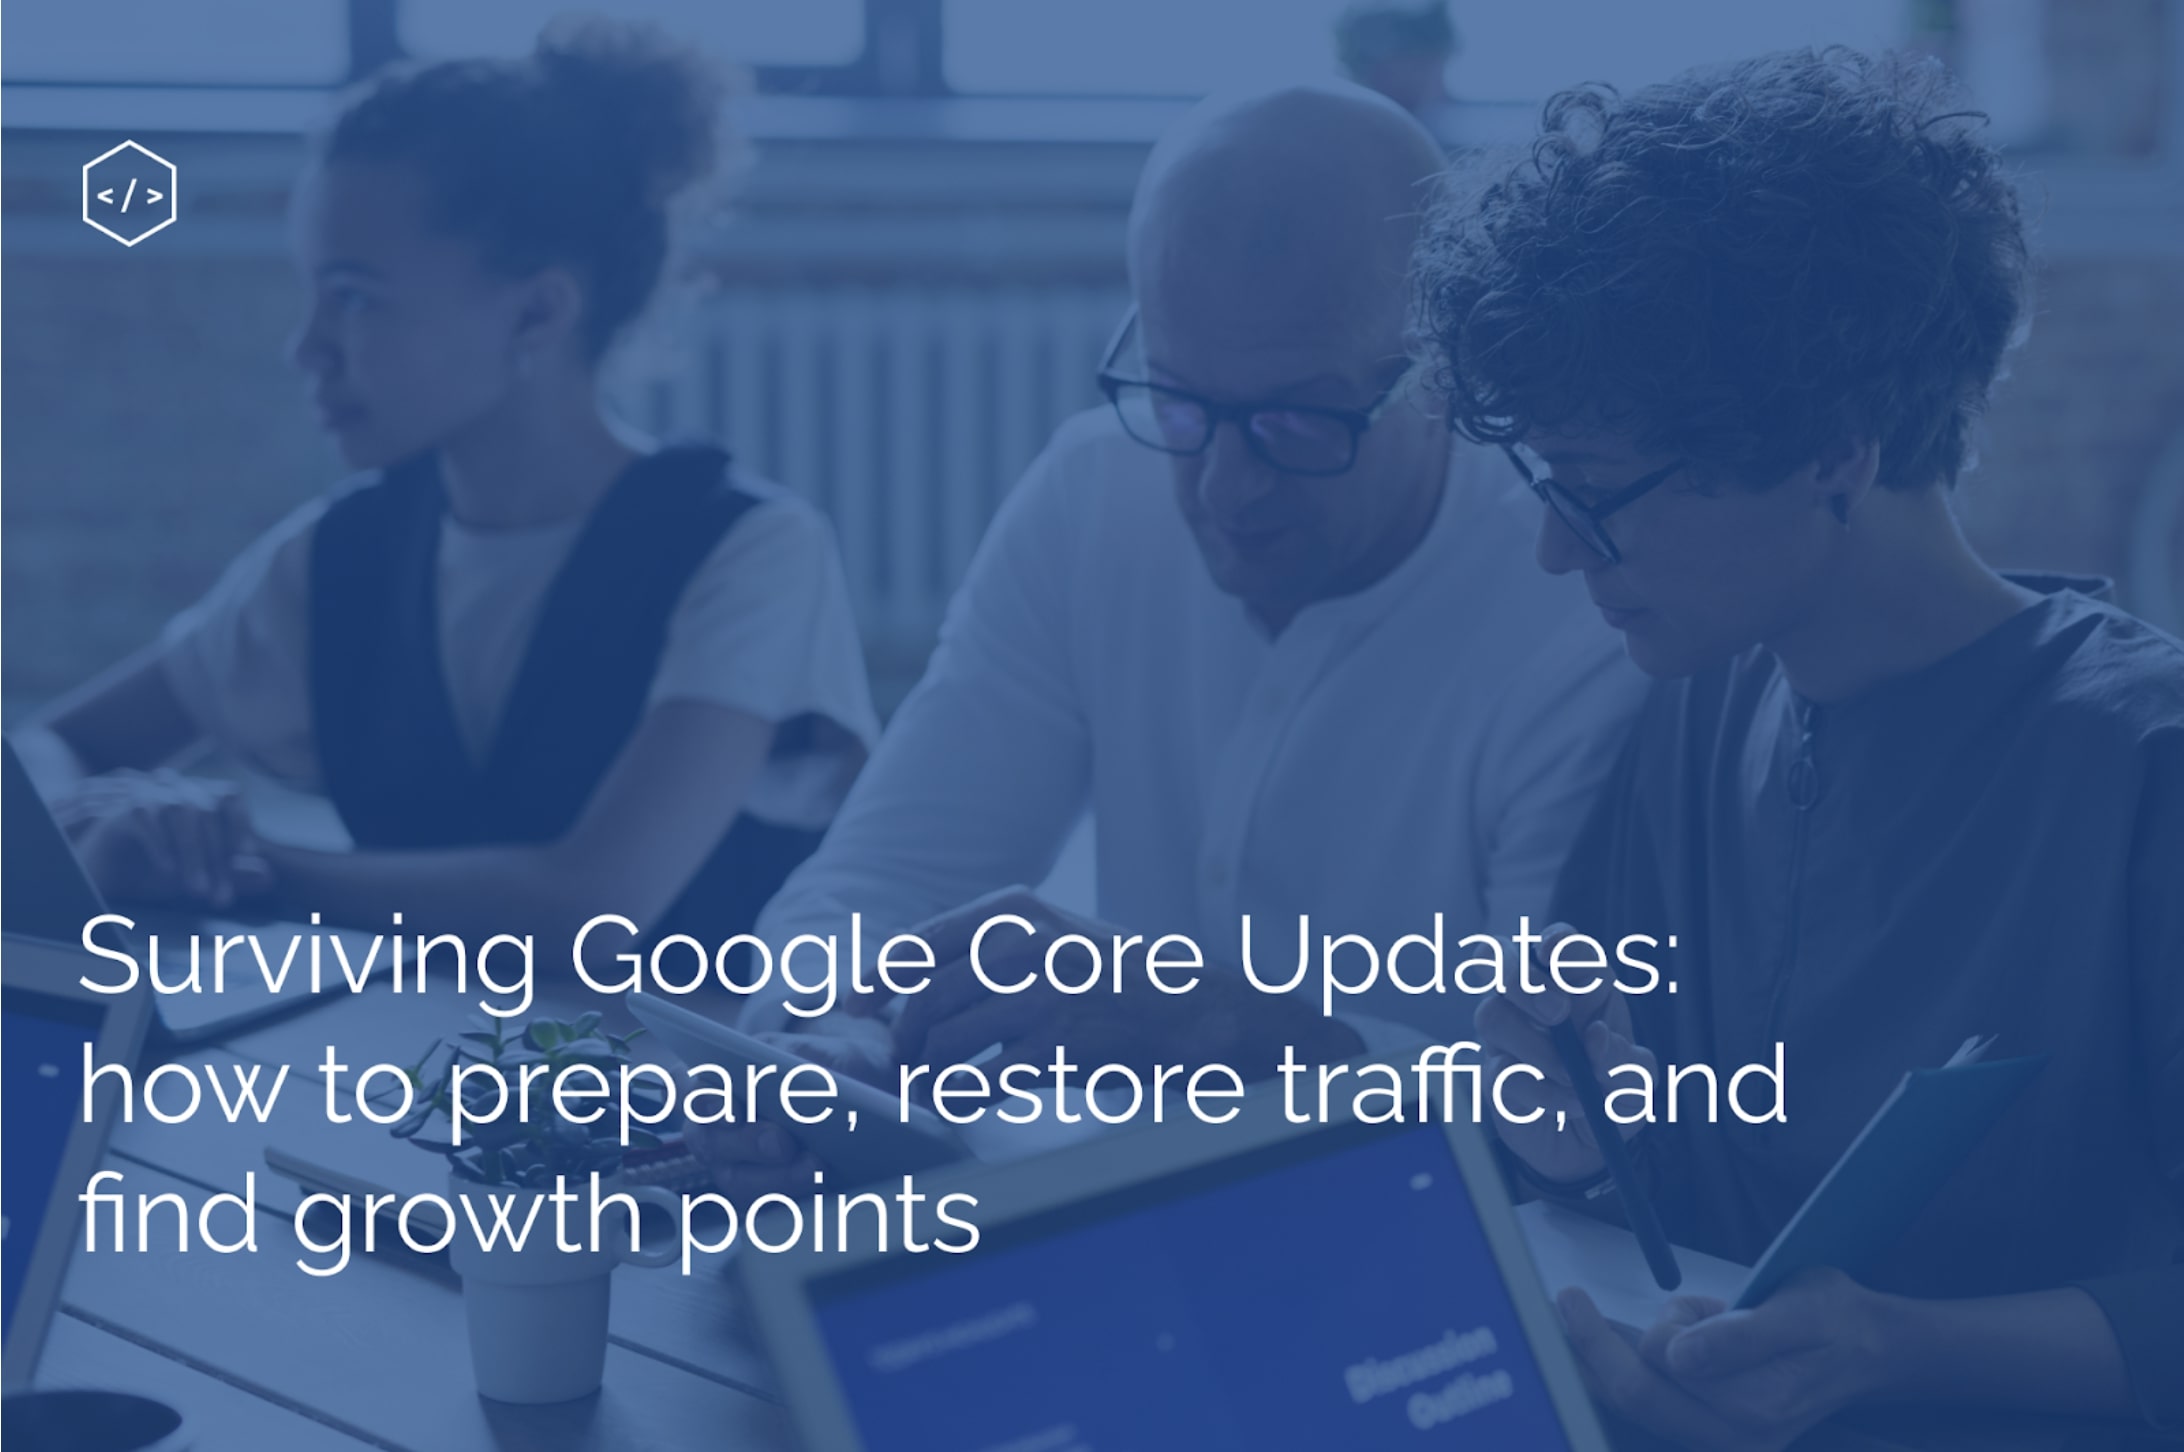 How to restore traffic and find growth points